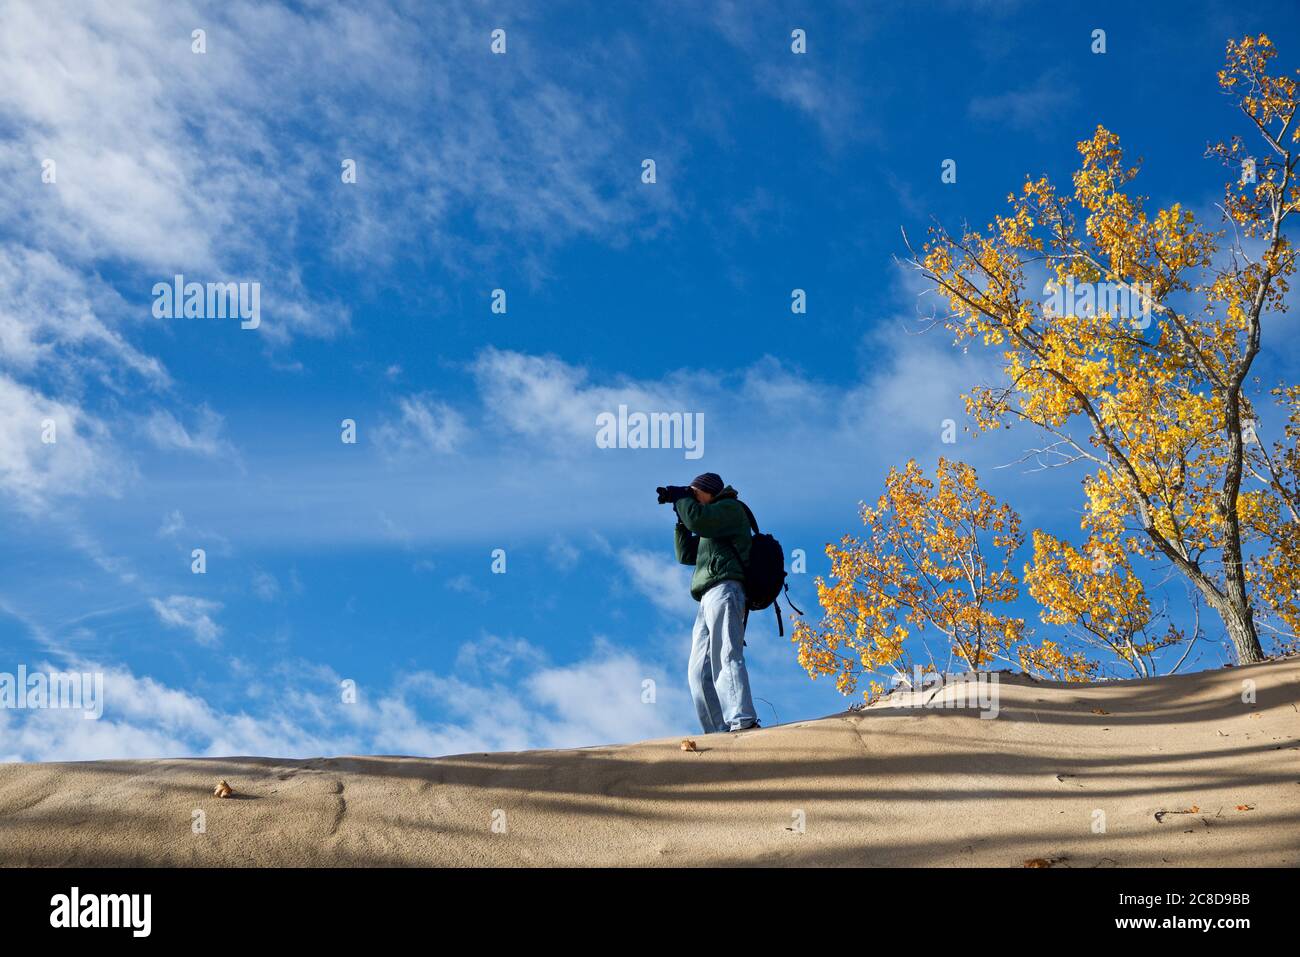 Photographer in the sand dune with blue sky and autumn leaf color Stock Photo